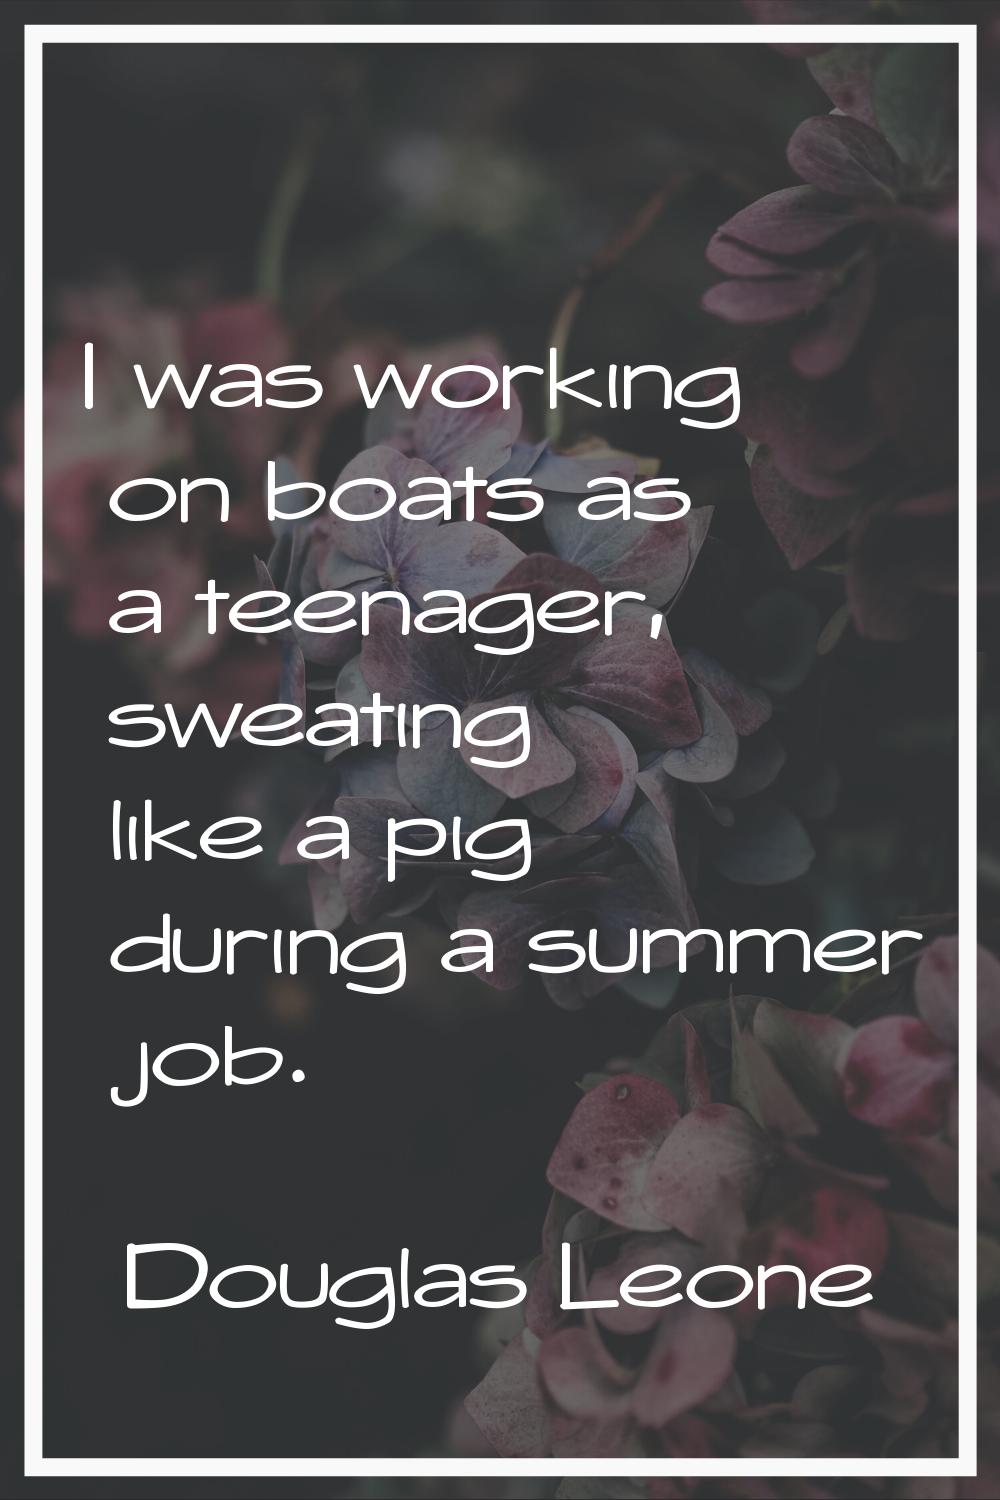 I was working on boats as a teenager, sweating like a pig during a summer job.